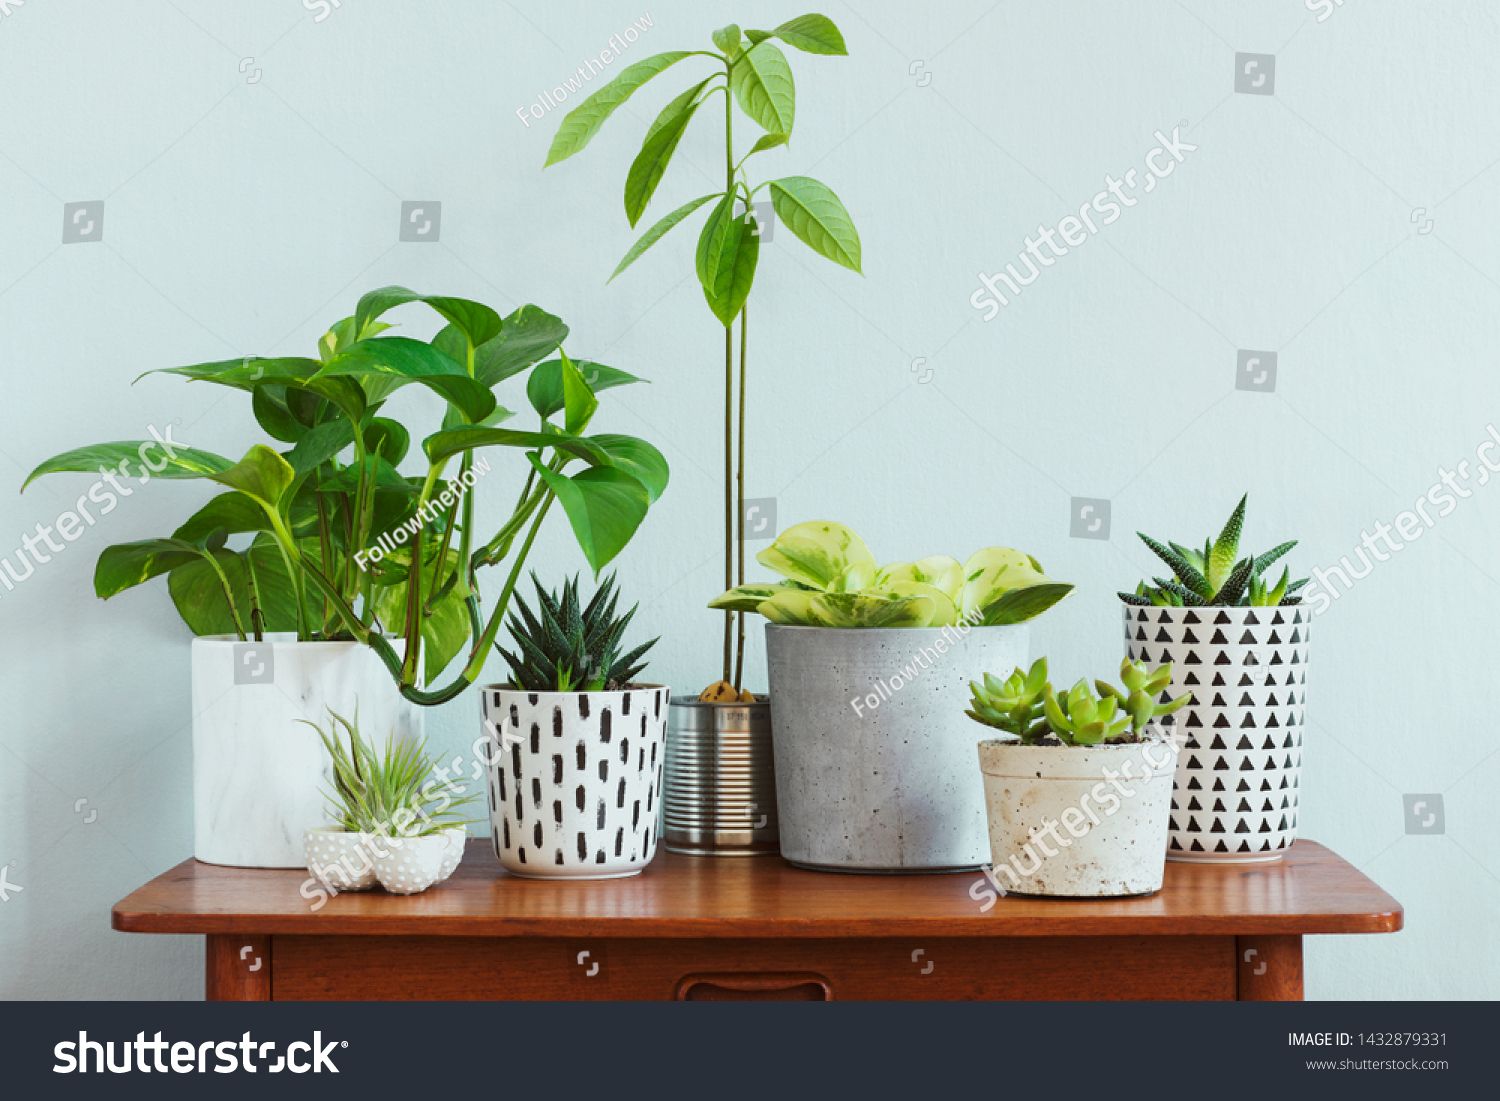 Stylish and botany composition of home interior garden filled a lot of plants in different design, elegant pots and avocado plant on the retro table. Gray backgrounds walls.  Spring blossom. Template. #1432879331